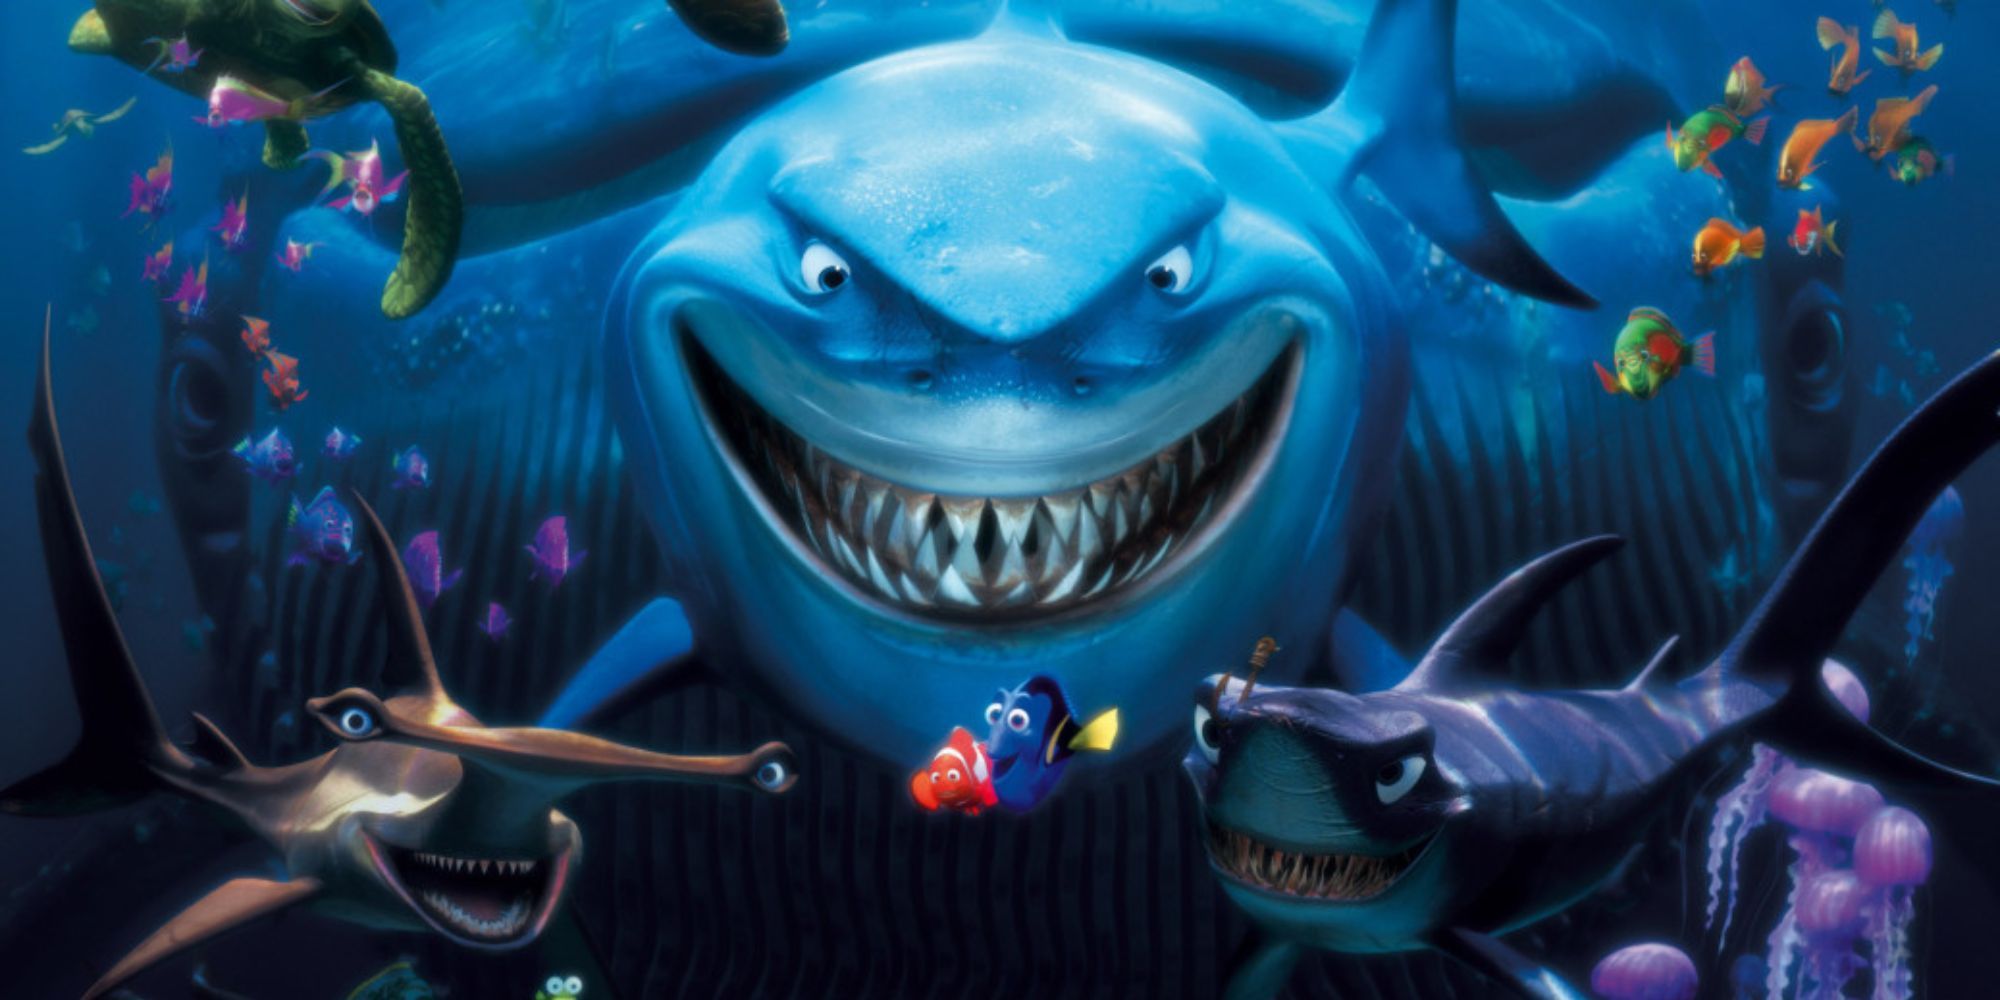 Marlin and Dory encounter Bruce the shark in Finding Nemo.